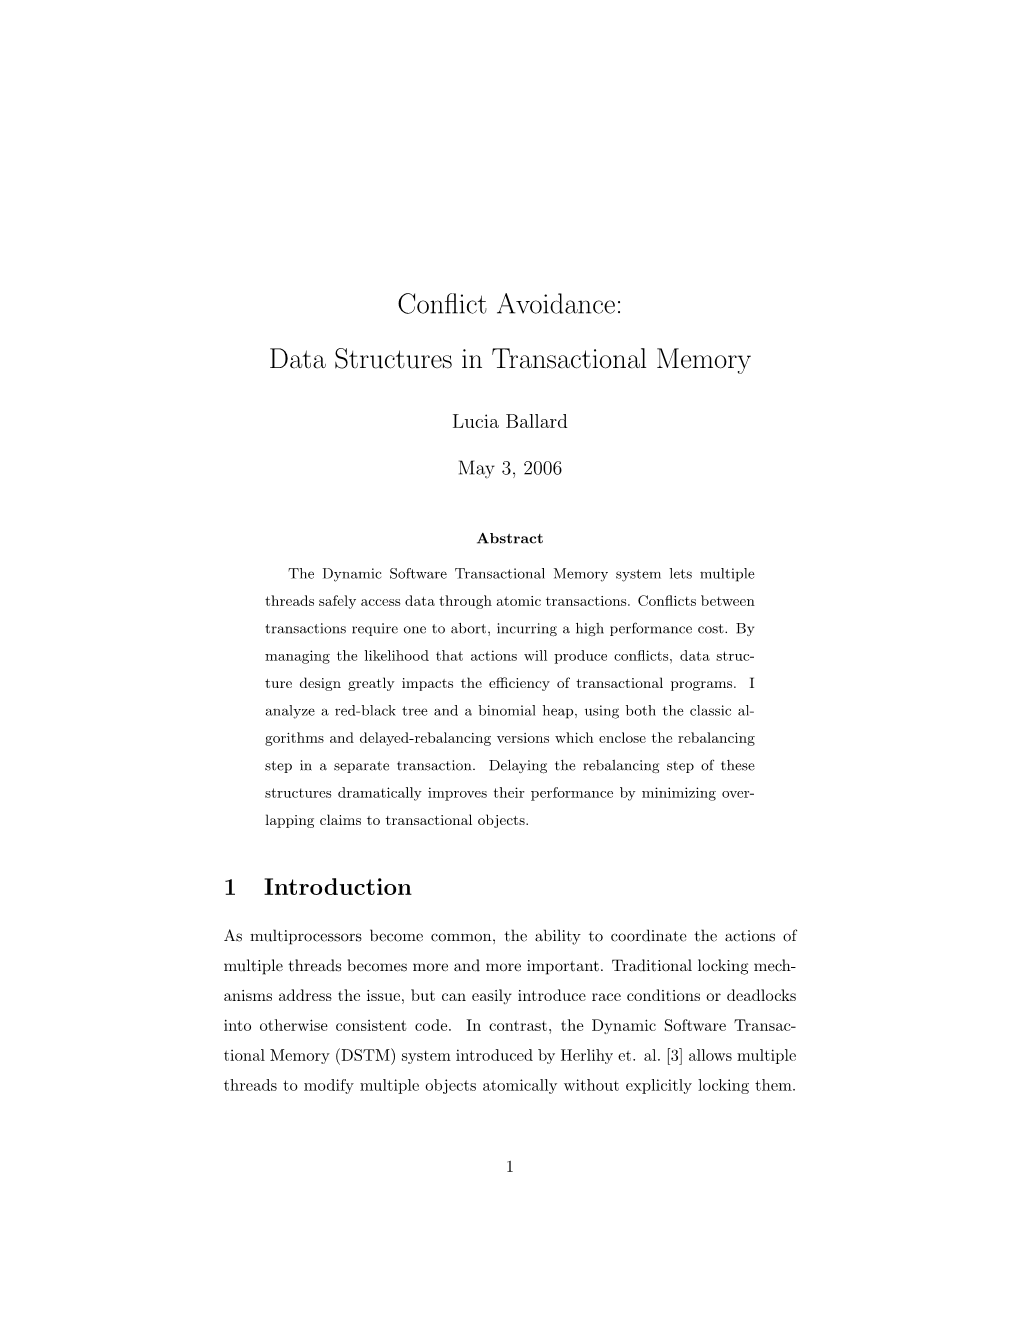 Conflict Avoidance: Data Structures in Transactional Memory